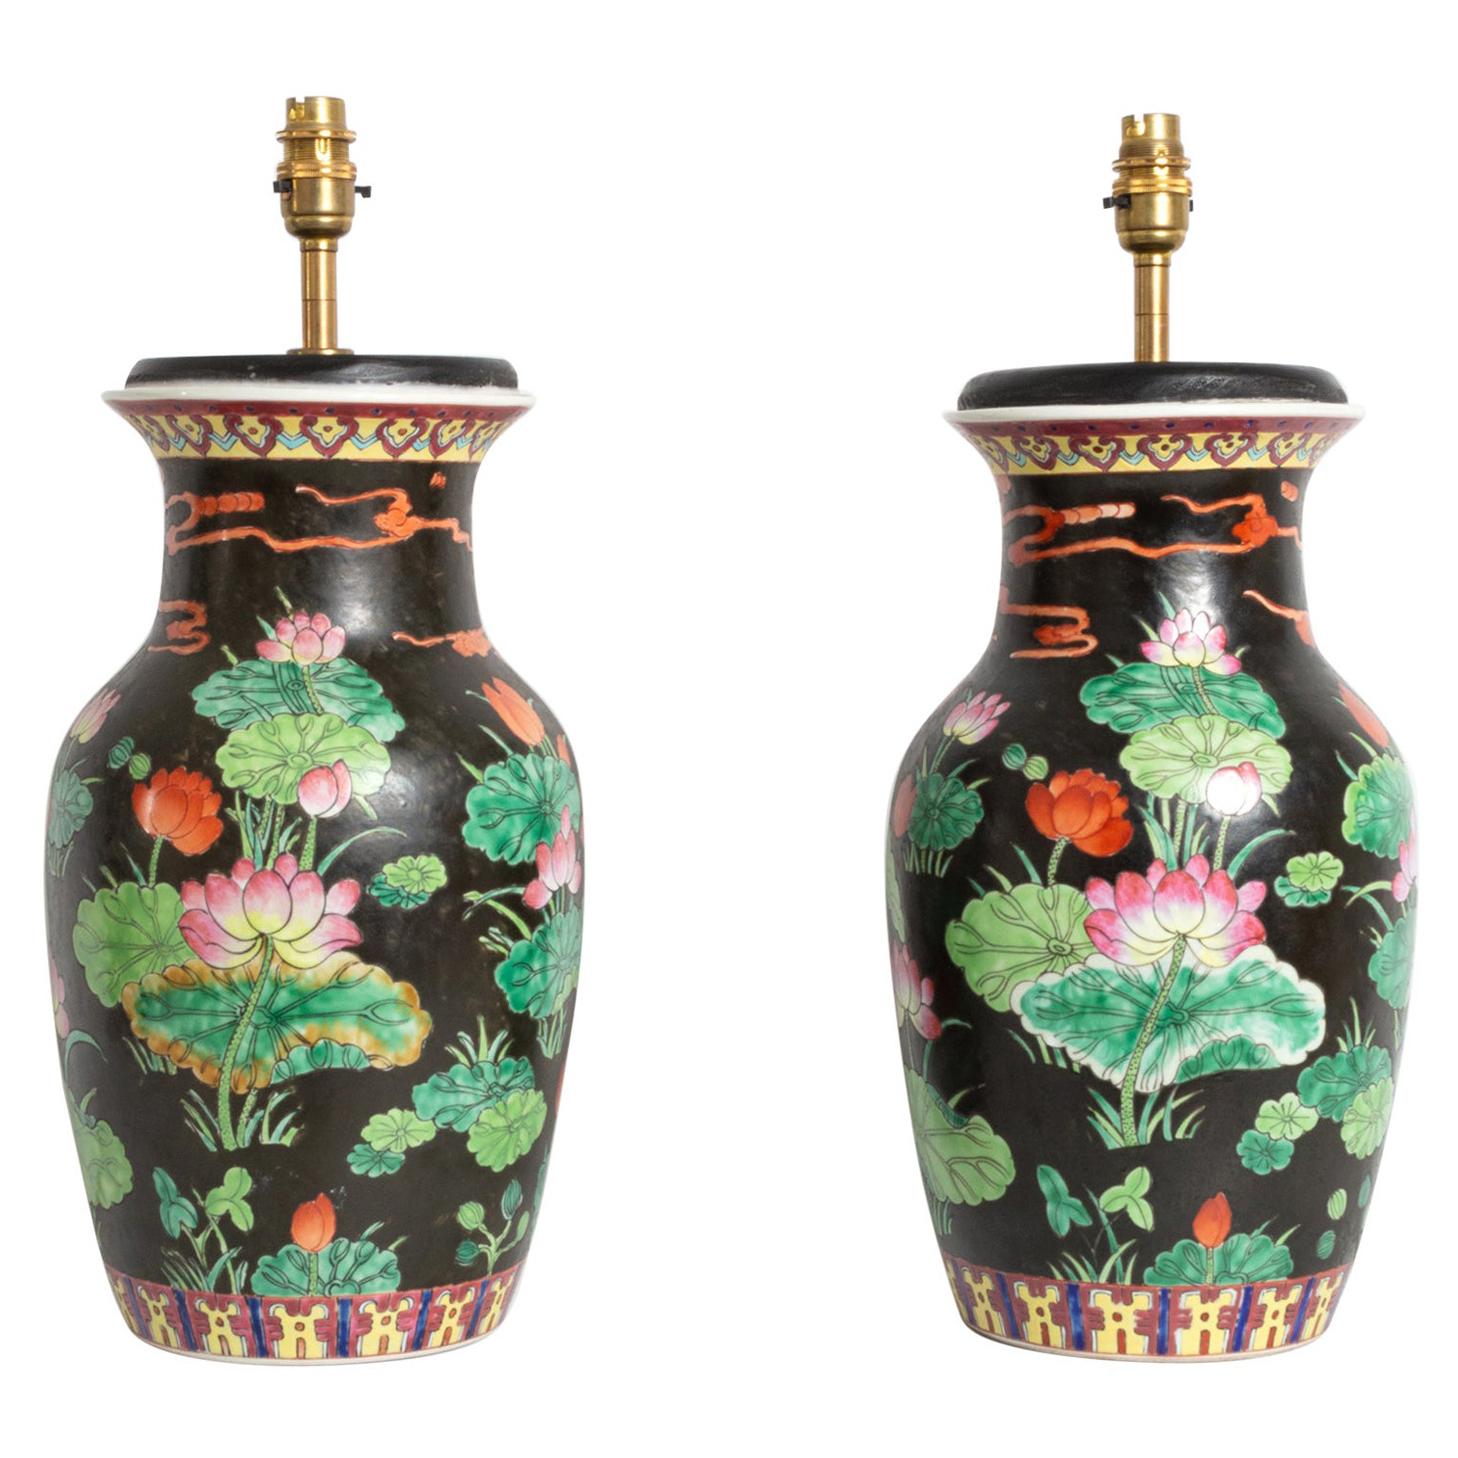 Antique Pair of 19th Century Famille Noire Chinese Vase Lamps, circa 1860 For Sale